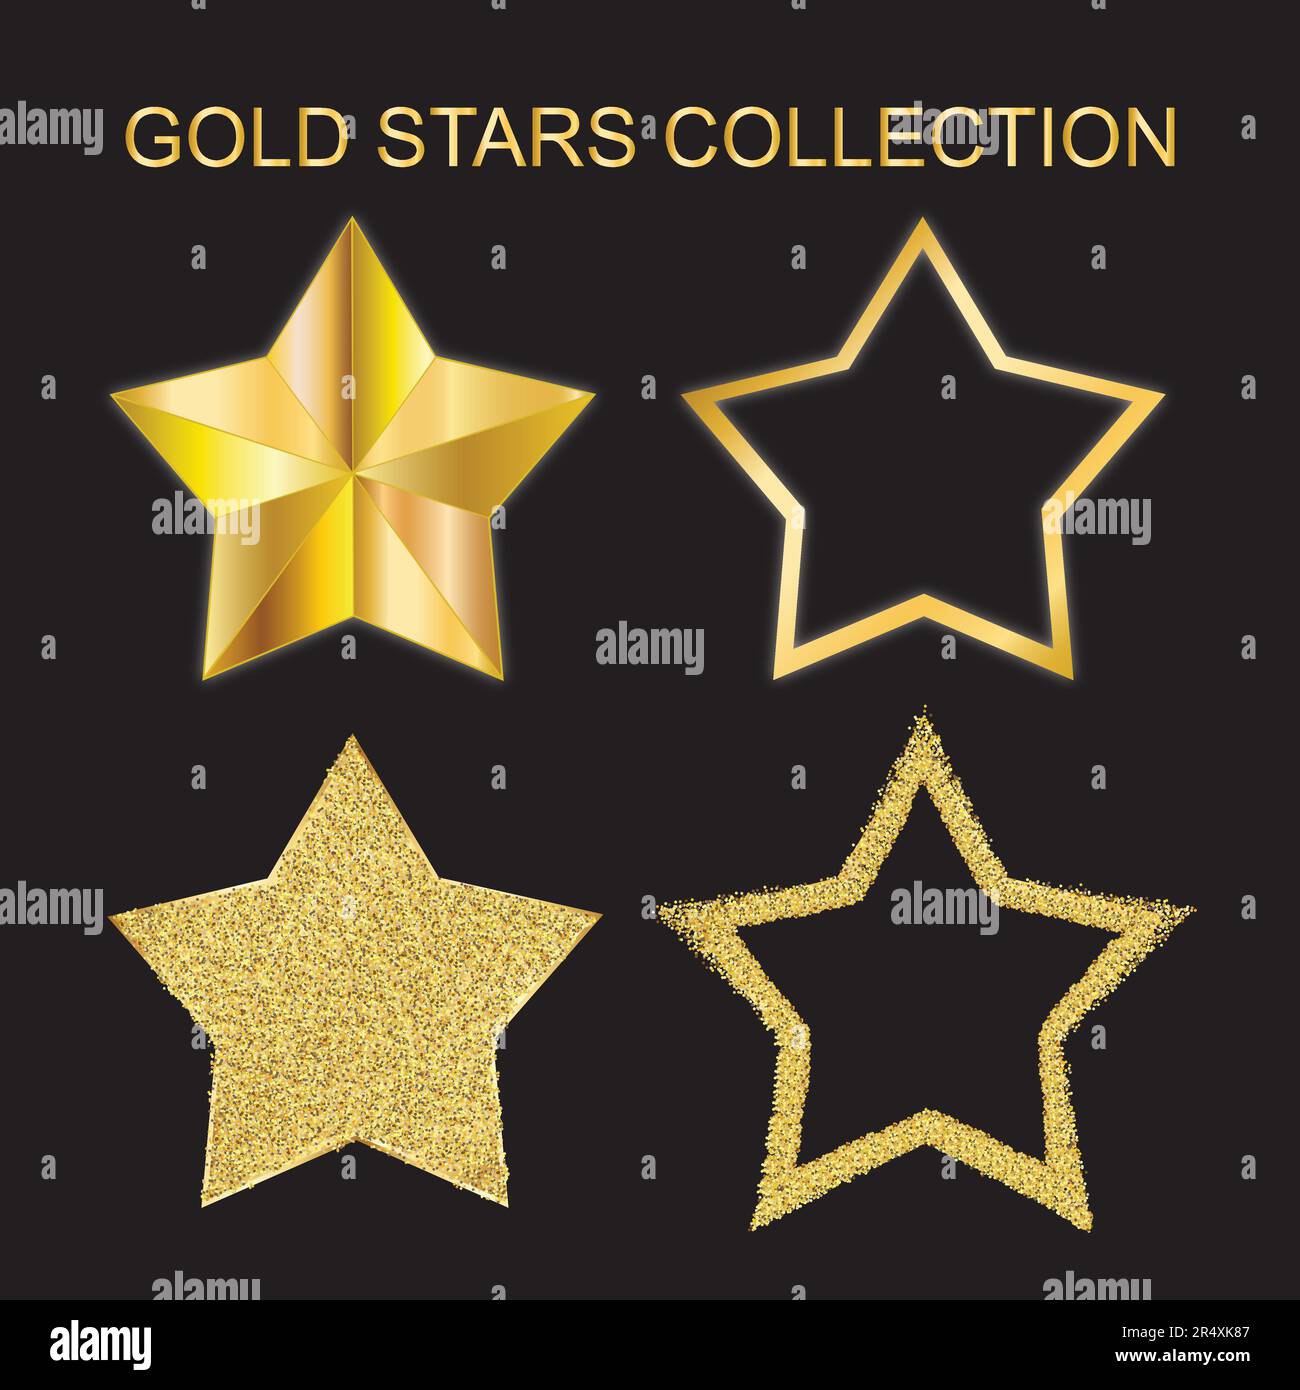 Gold Stars Collection. Set of 4 different gold five-point stars. Stock Vector